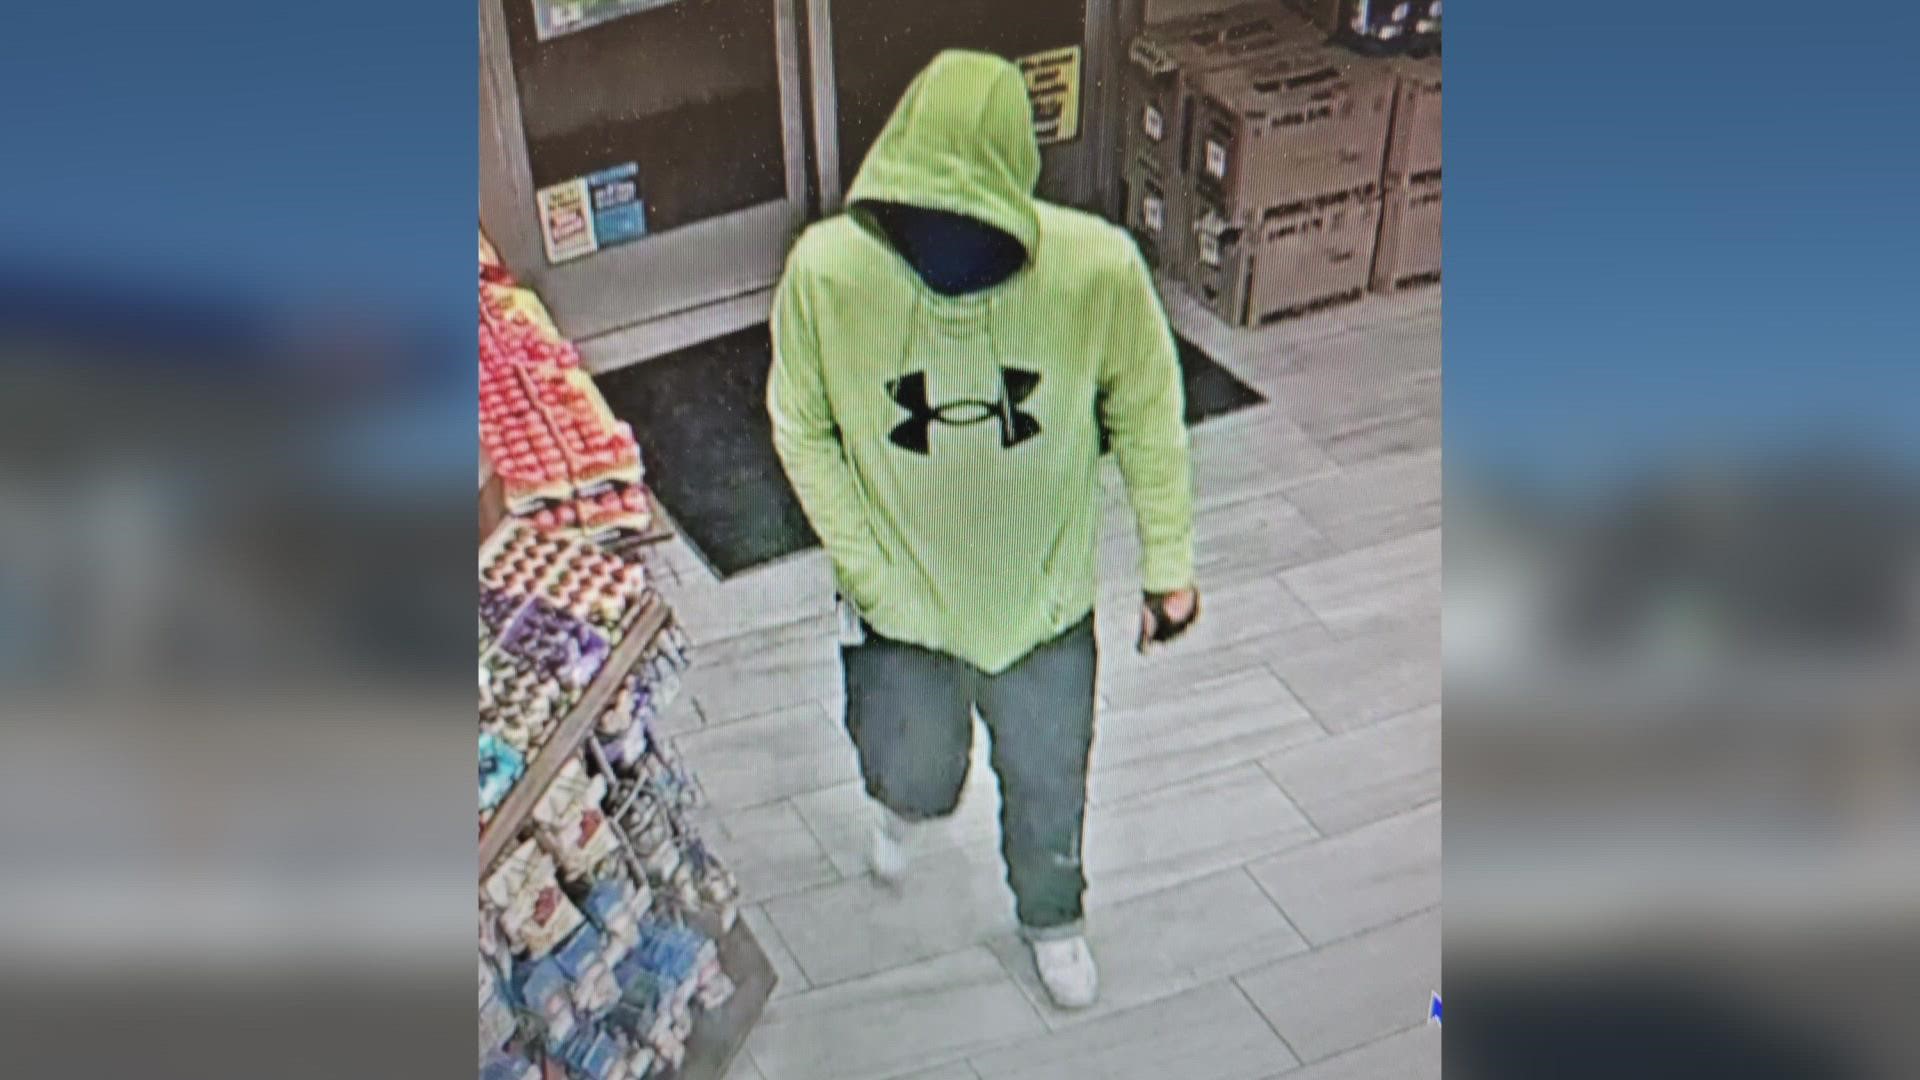 The Lisbon Police Department said a white male is suspected of using a gun to steal money from the Rusty Lantern at 689 Lisbon Street on January 22 at 5:50 a.m.